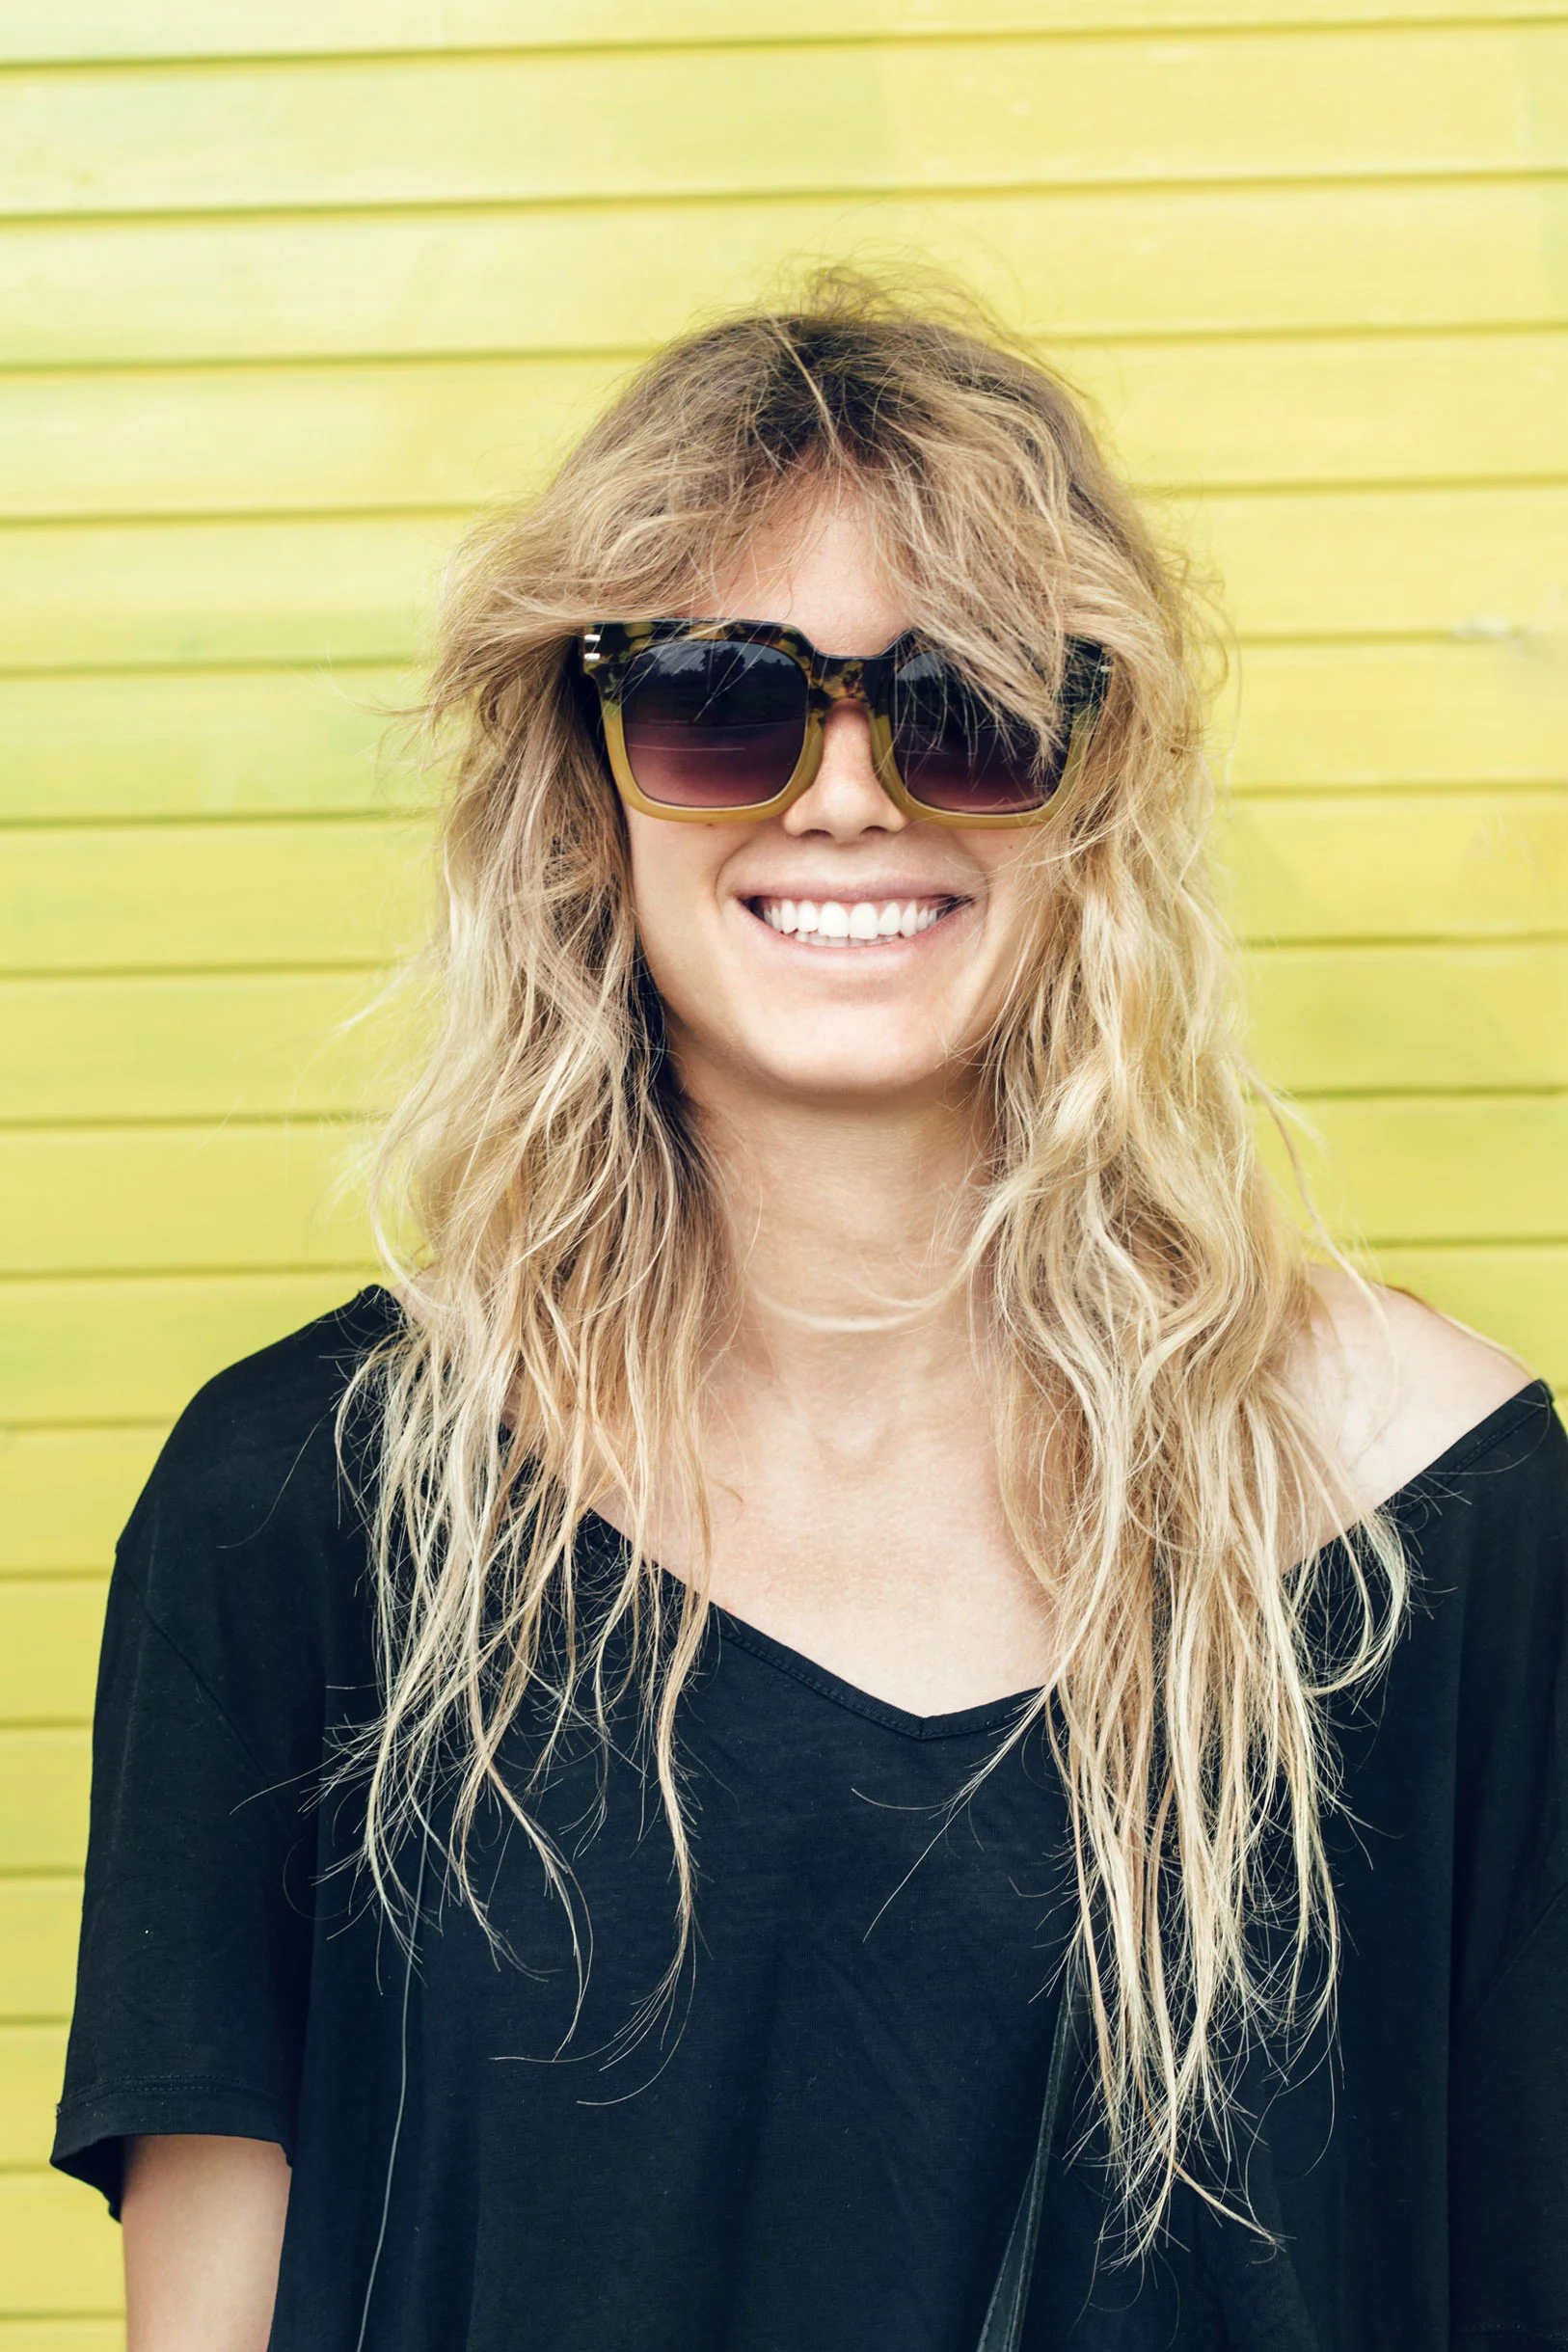 a woman with long hair wearing sunglasses